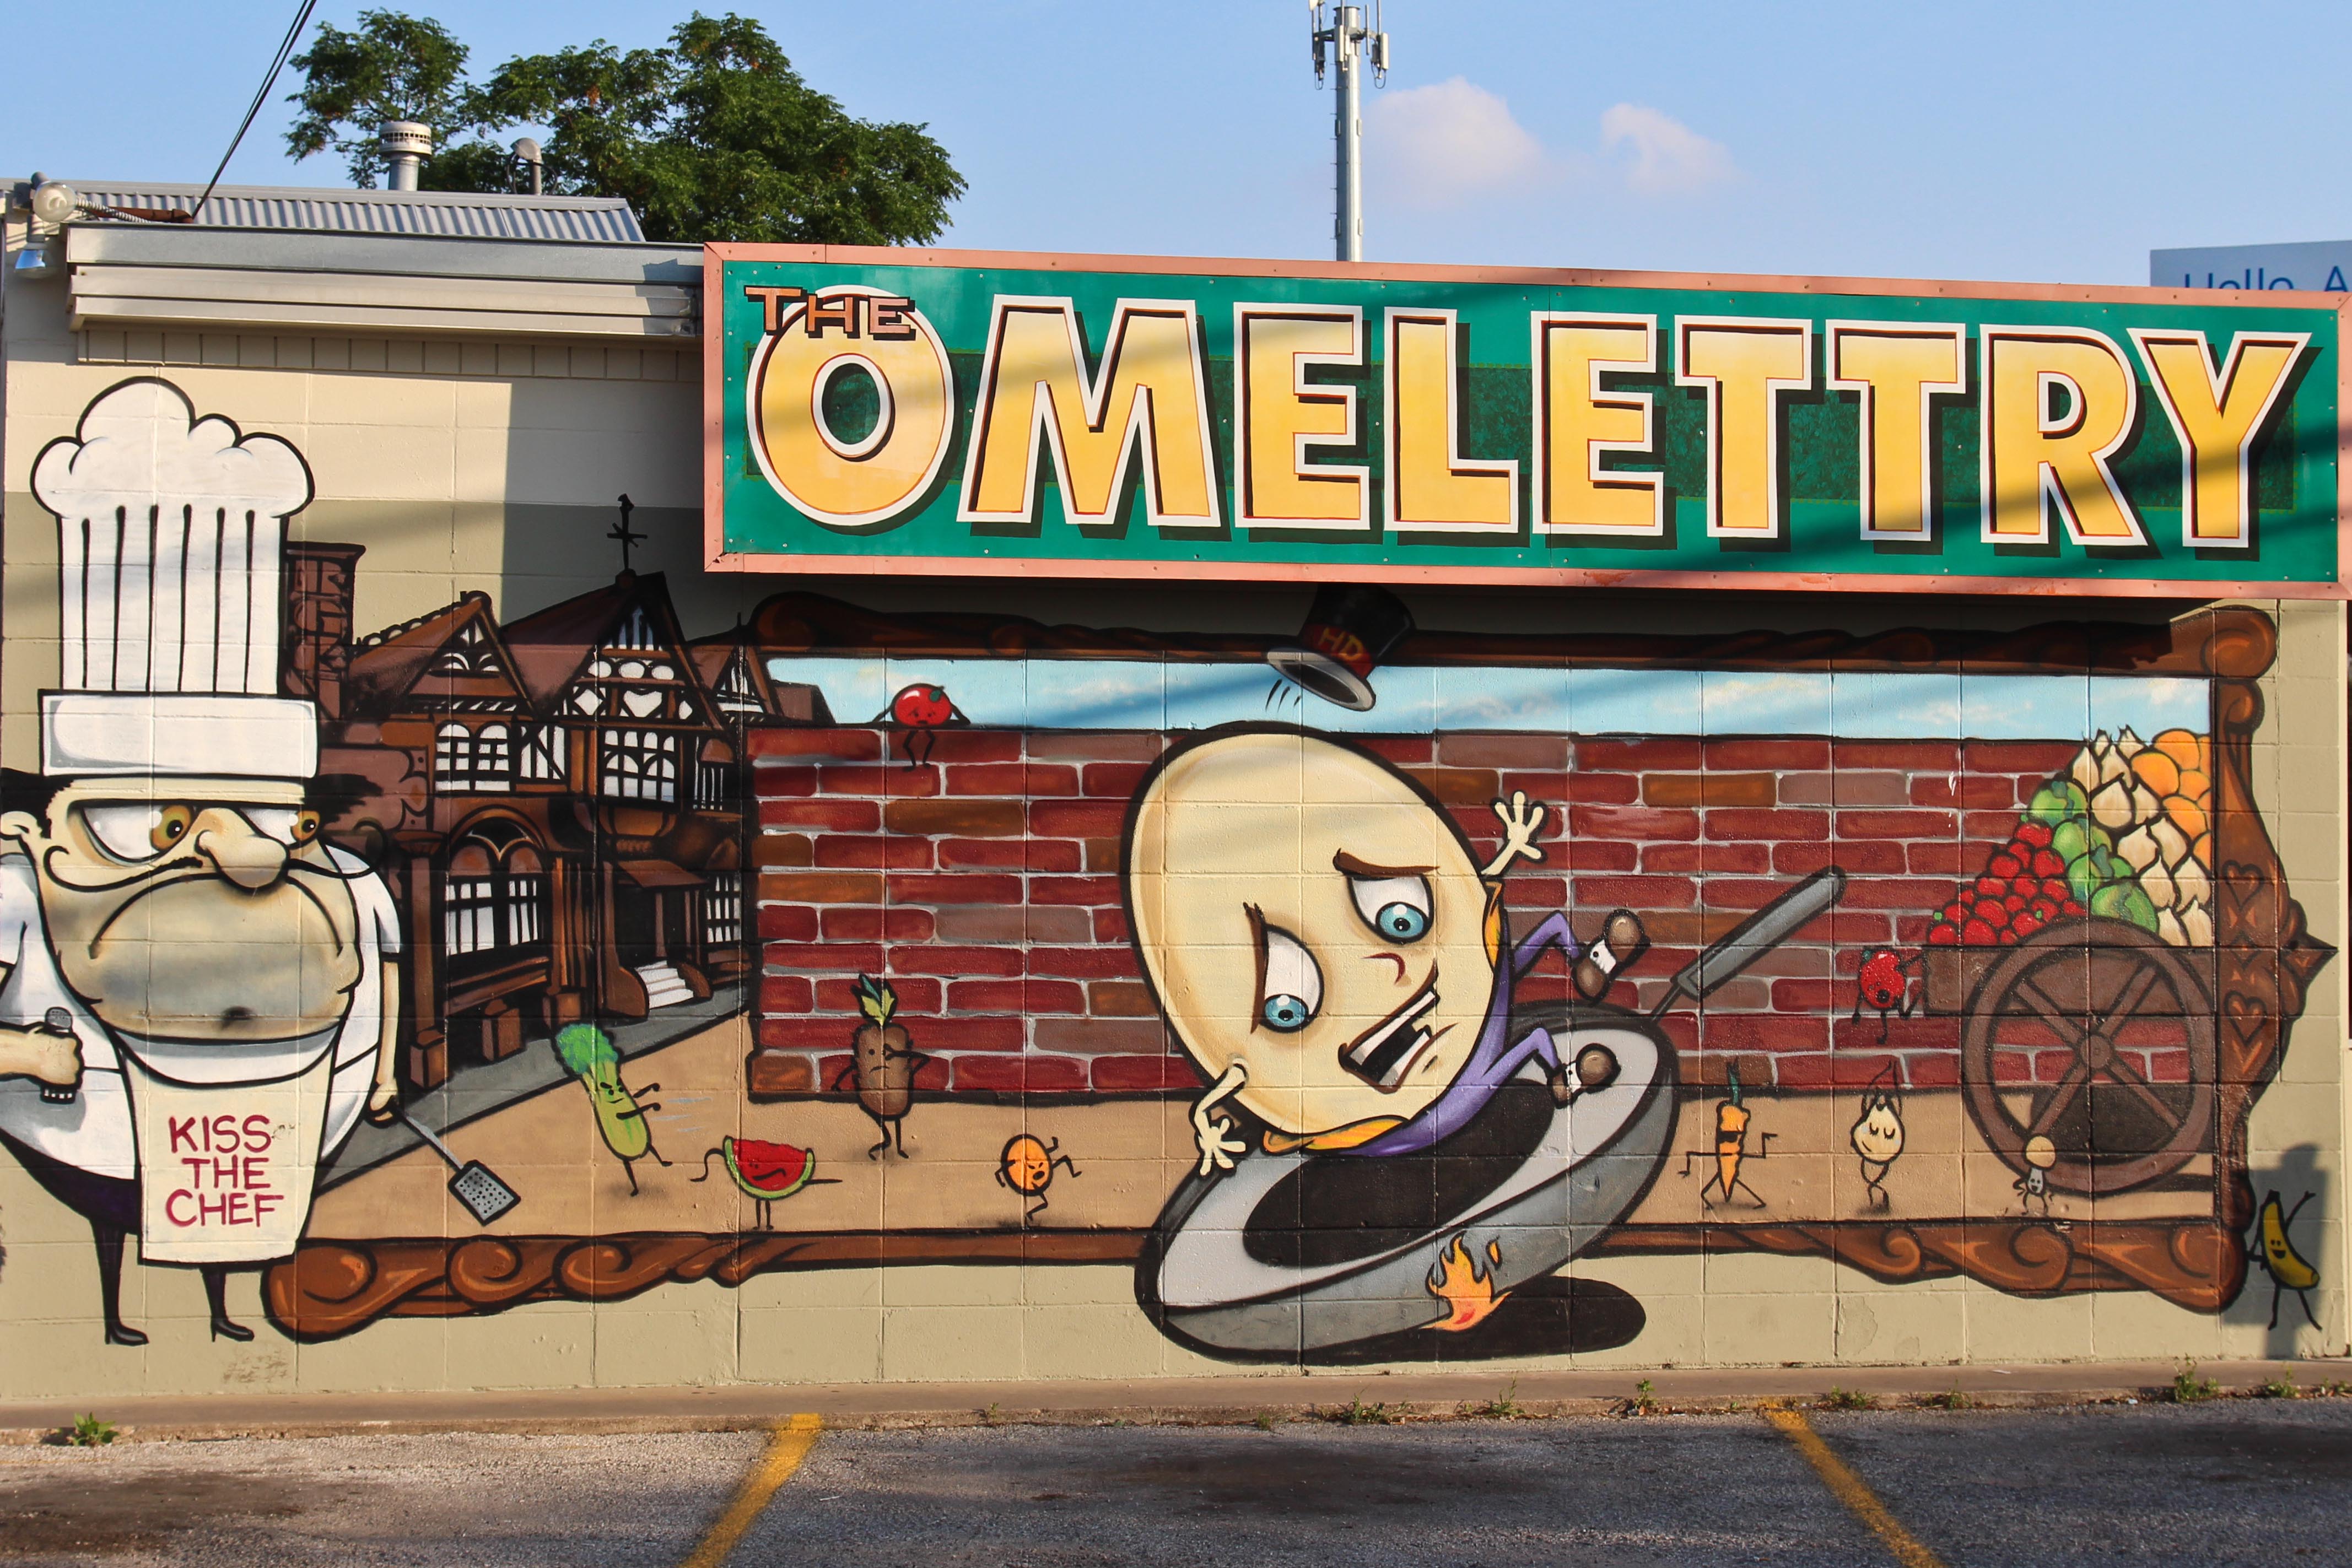 The original Omelettry